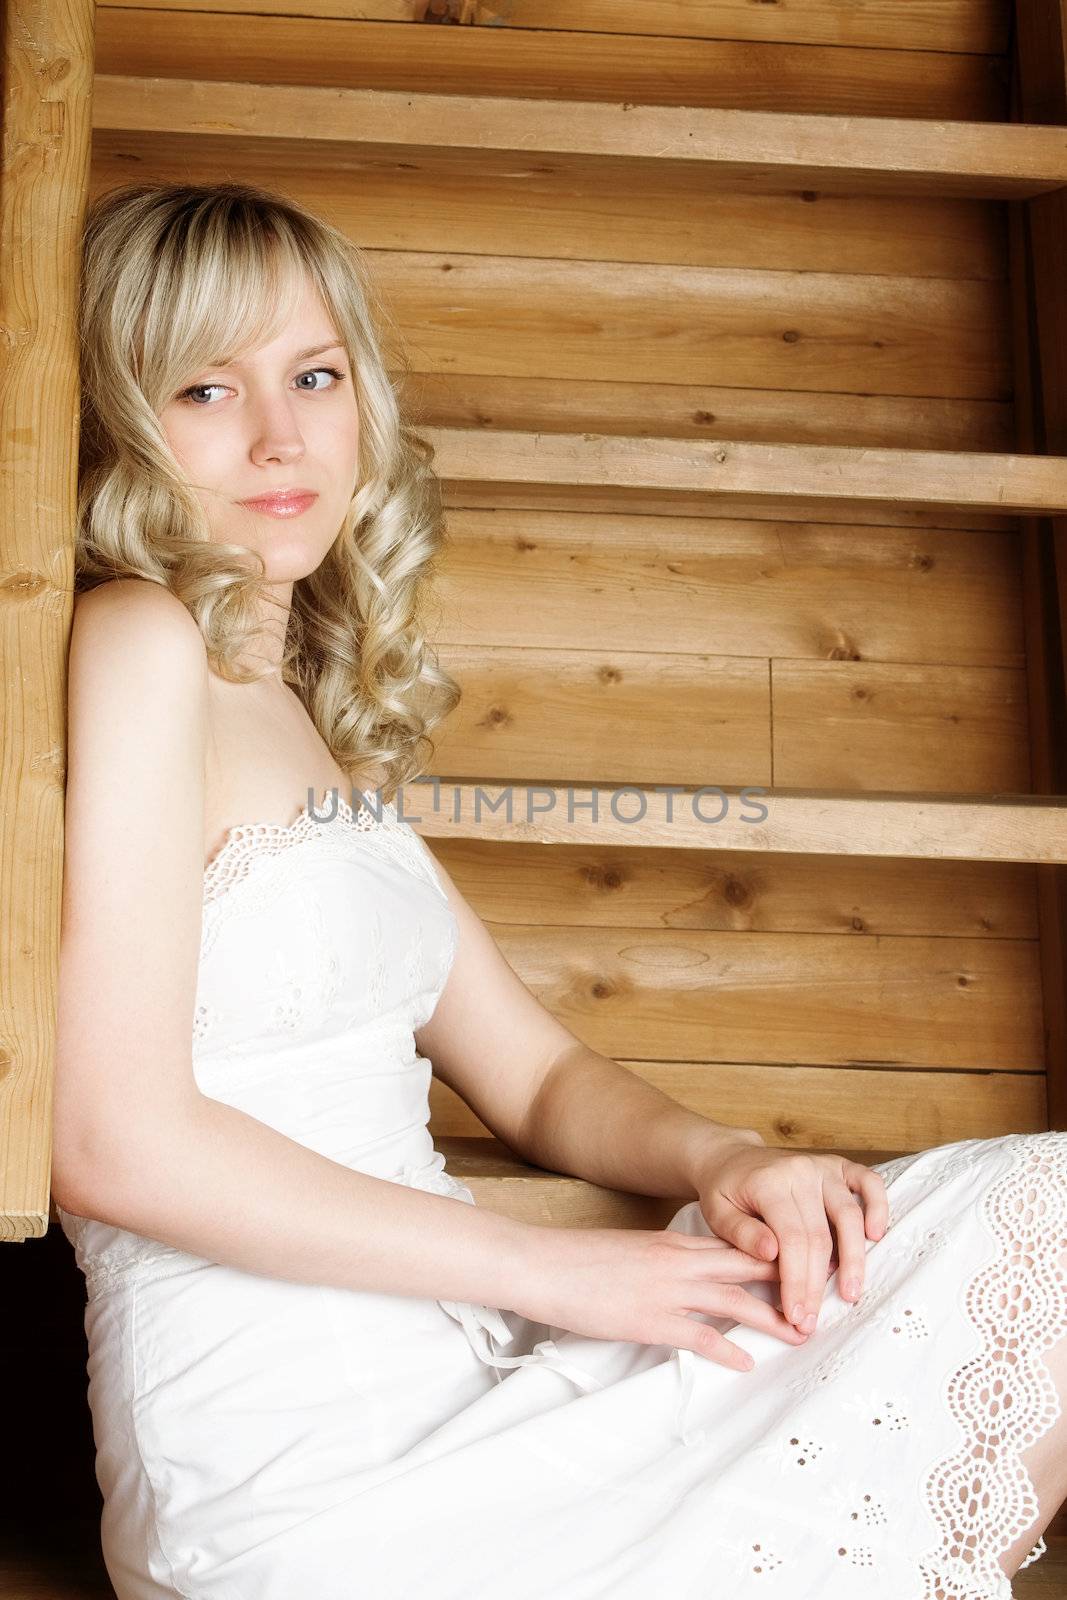 The blond girl in a white dress near a wooden ladder